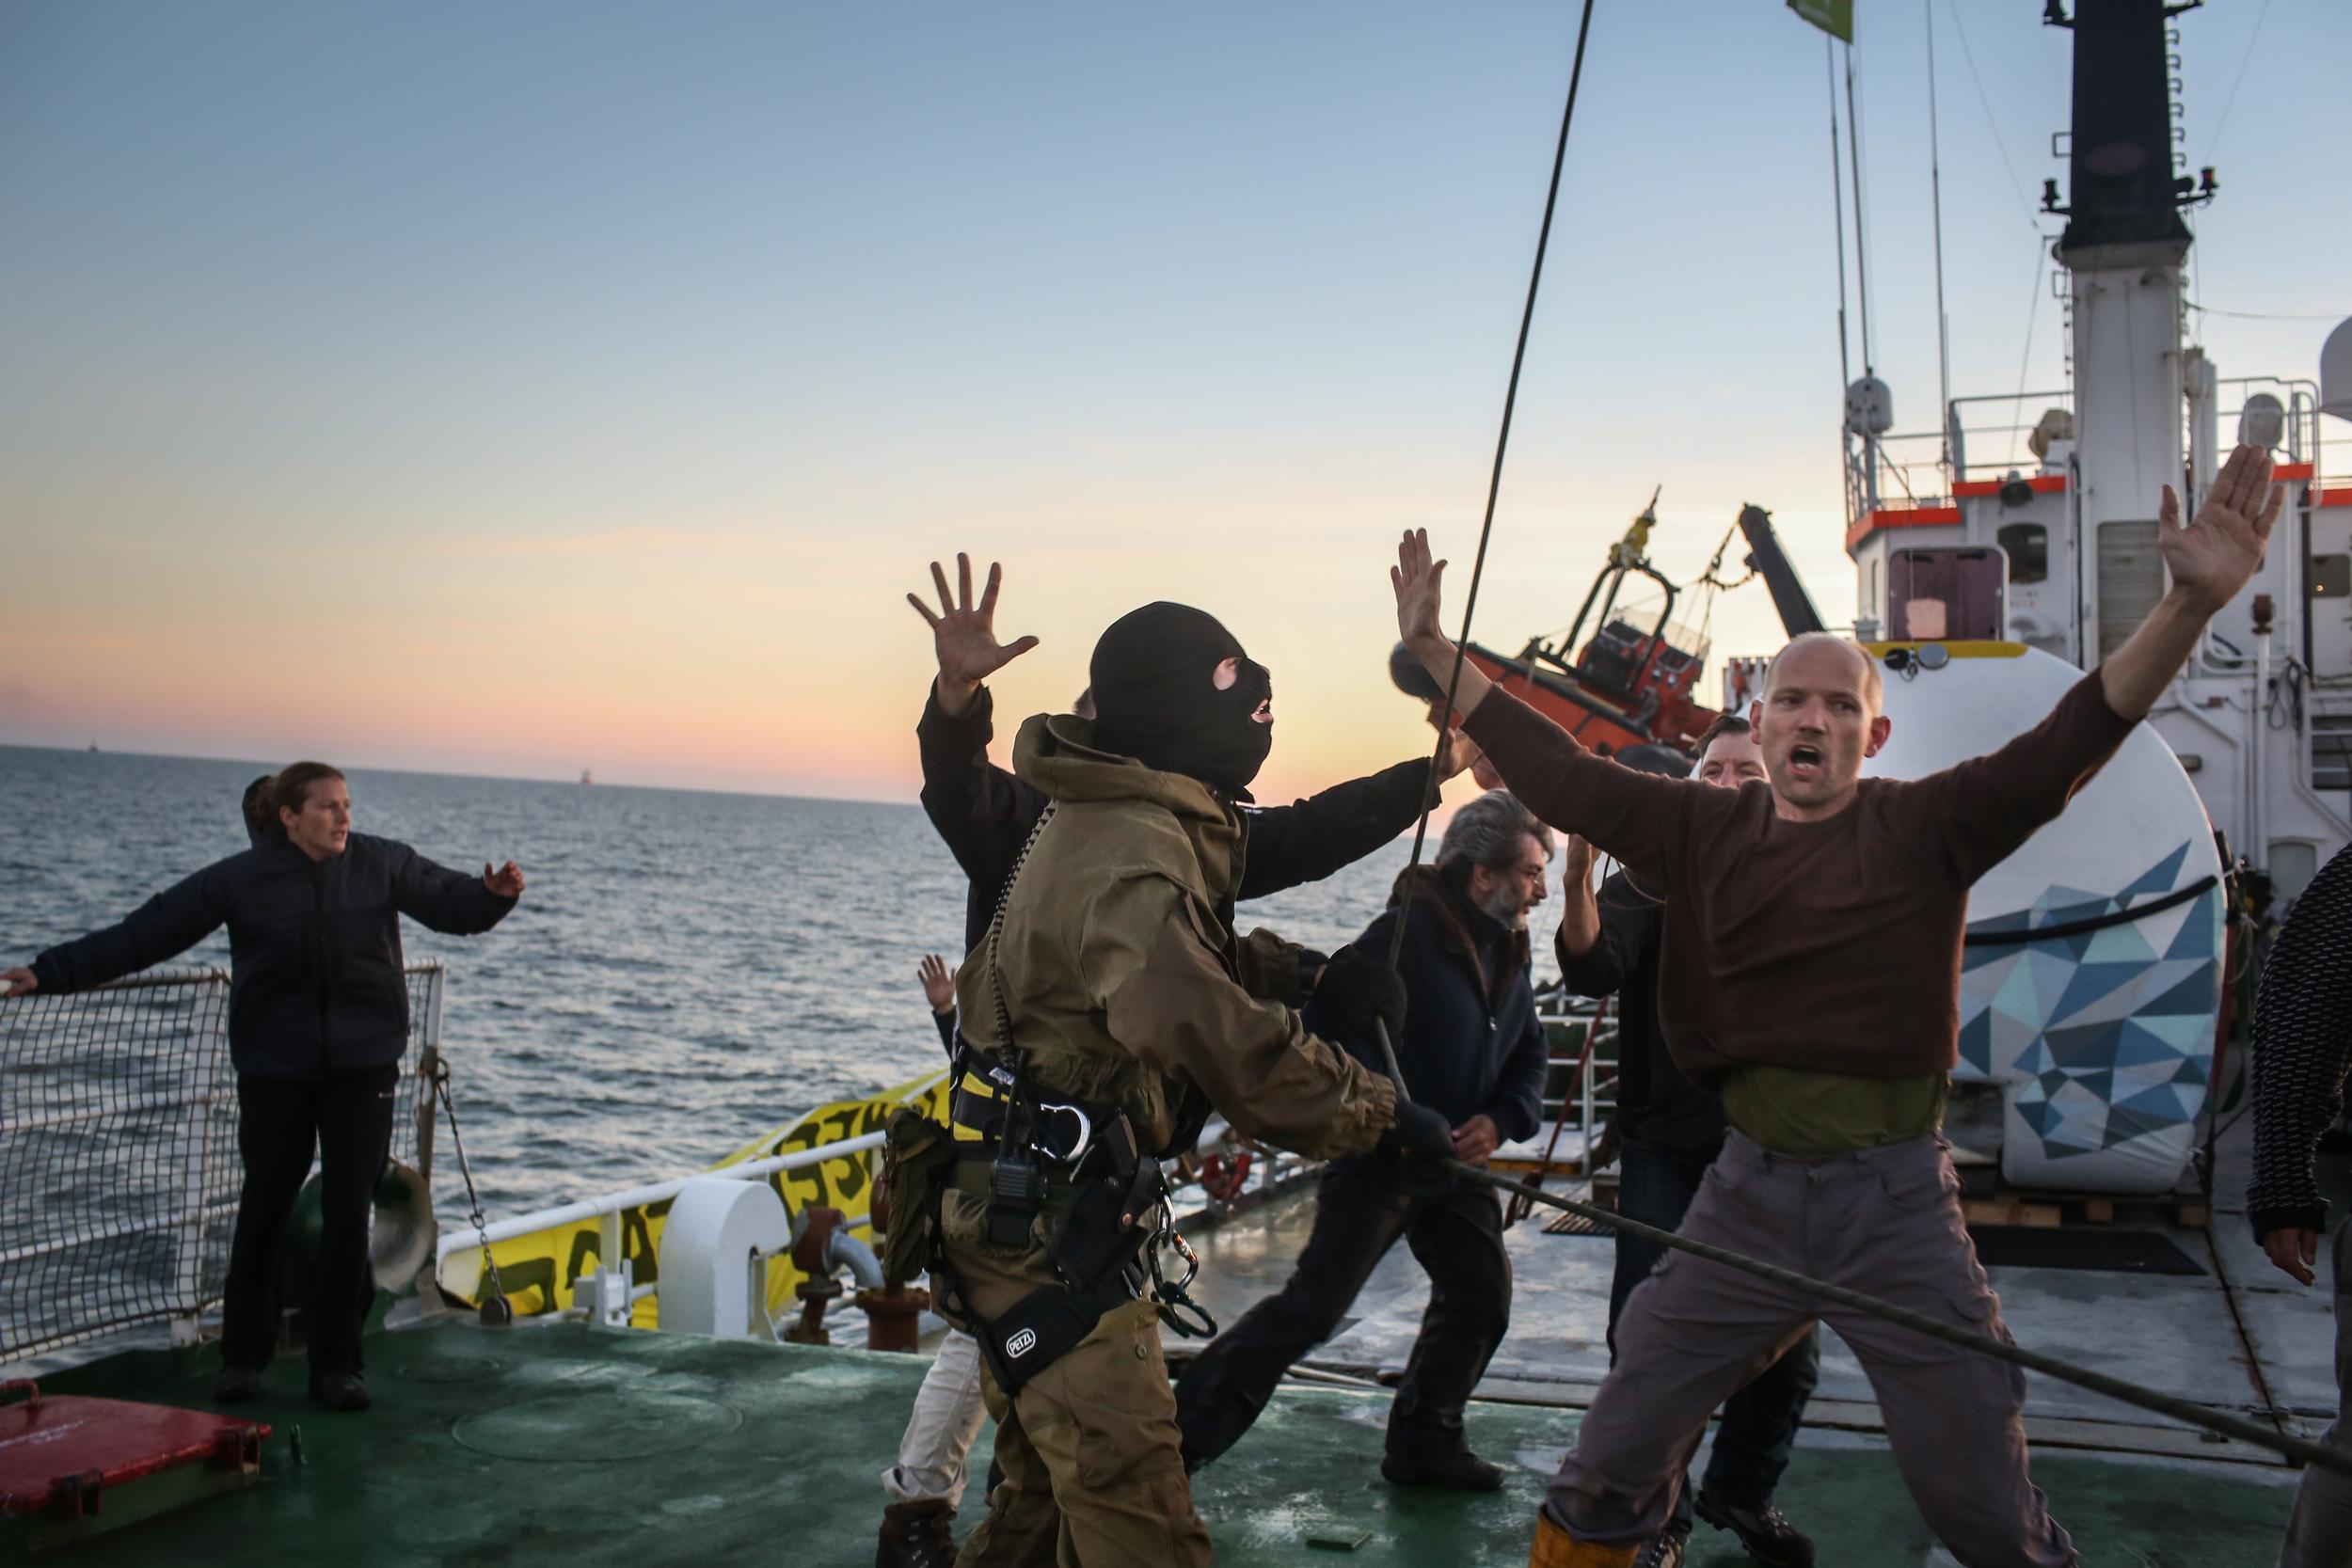 On the deck of a ship, a member of Greenpeace crew holds his hands up as he's accosted by a man in military uniform and a black balaclava.